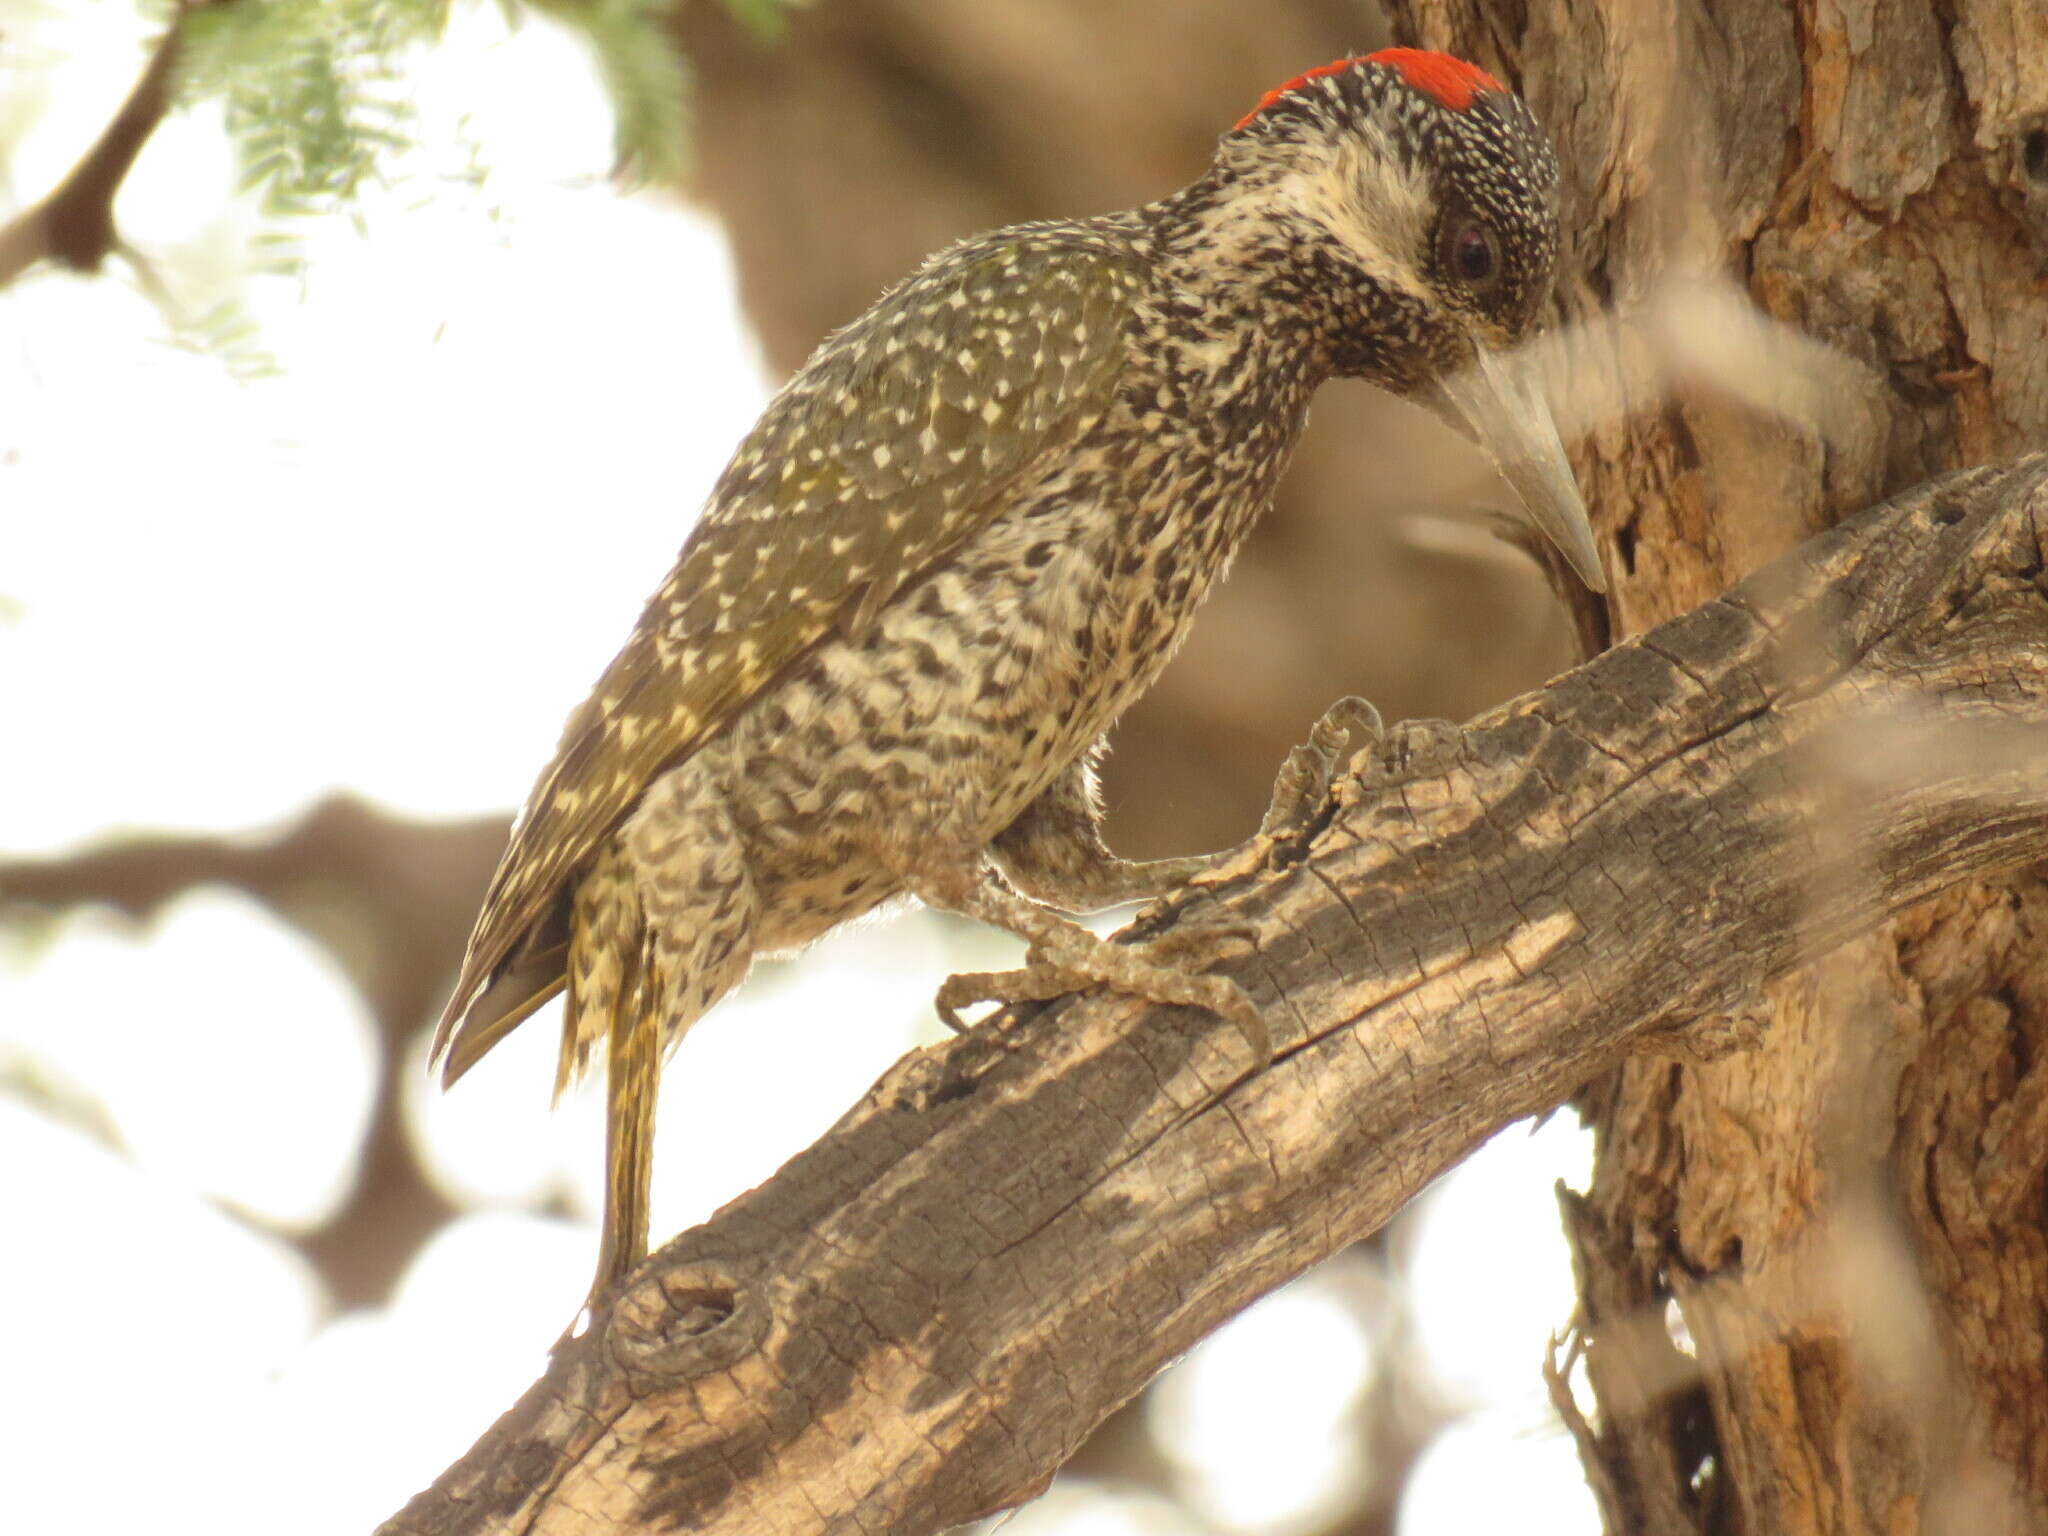 Image of Golden-tailed Woodpecker